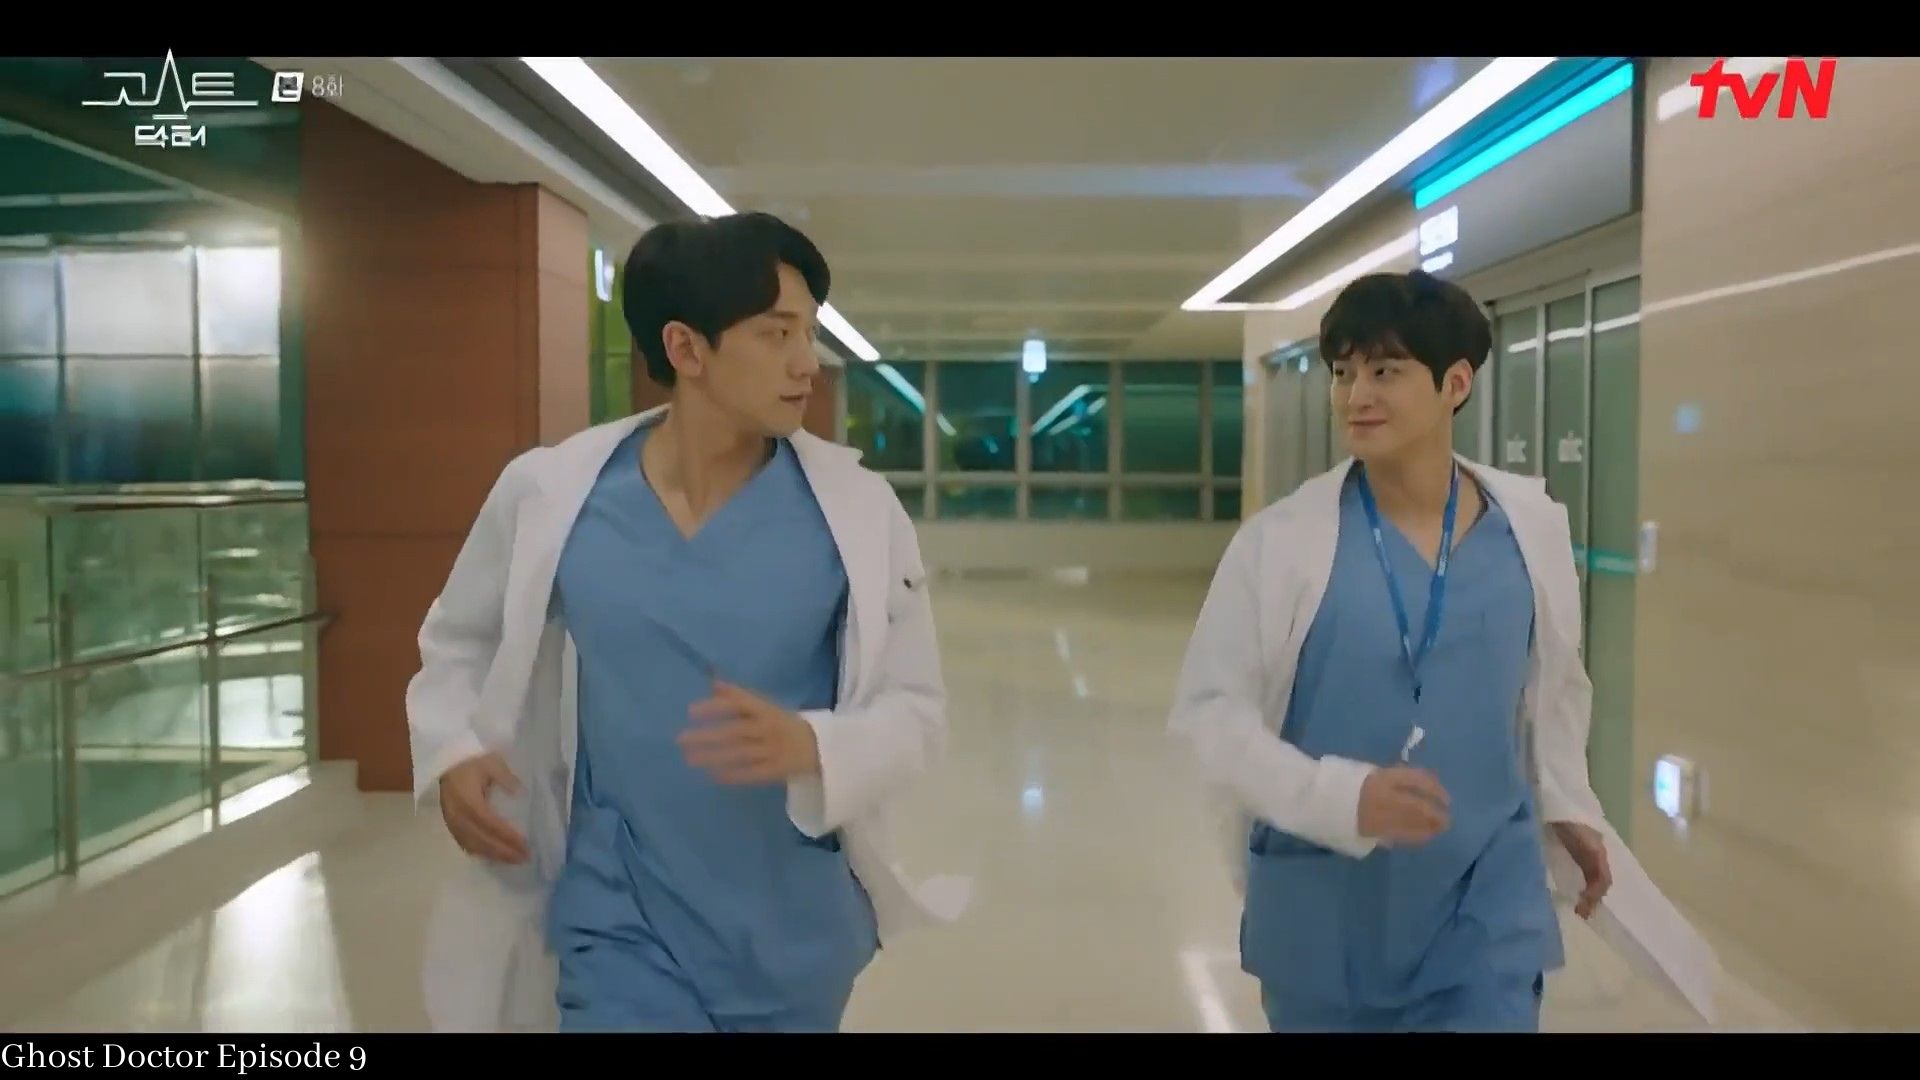 ‘Ghost Doctor Episode 9’: Kim Bum & Rain In For a New Crisis